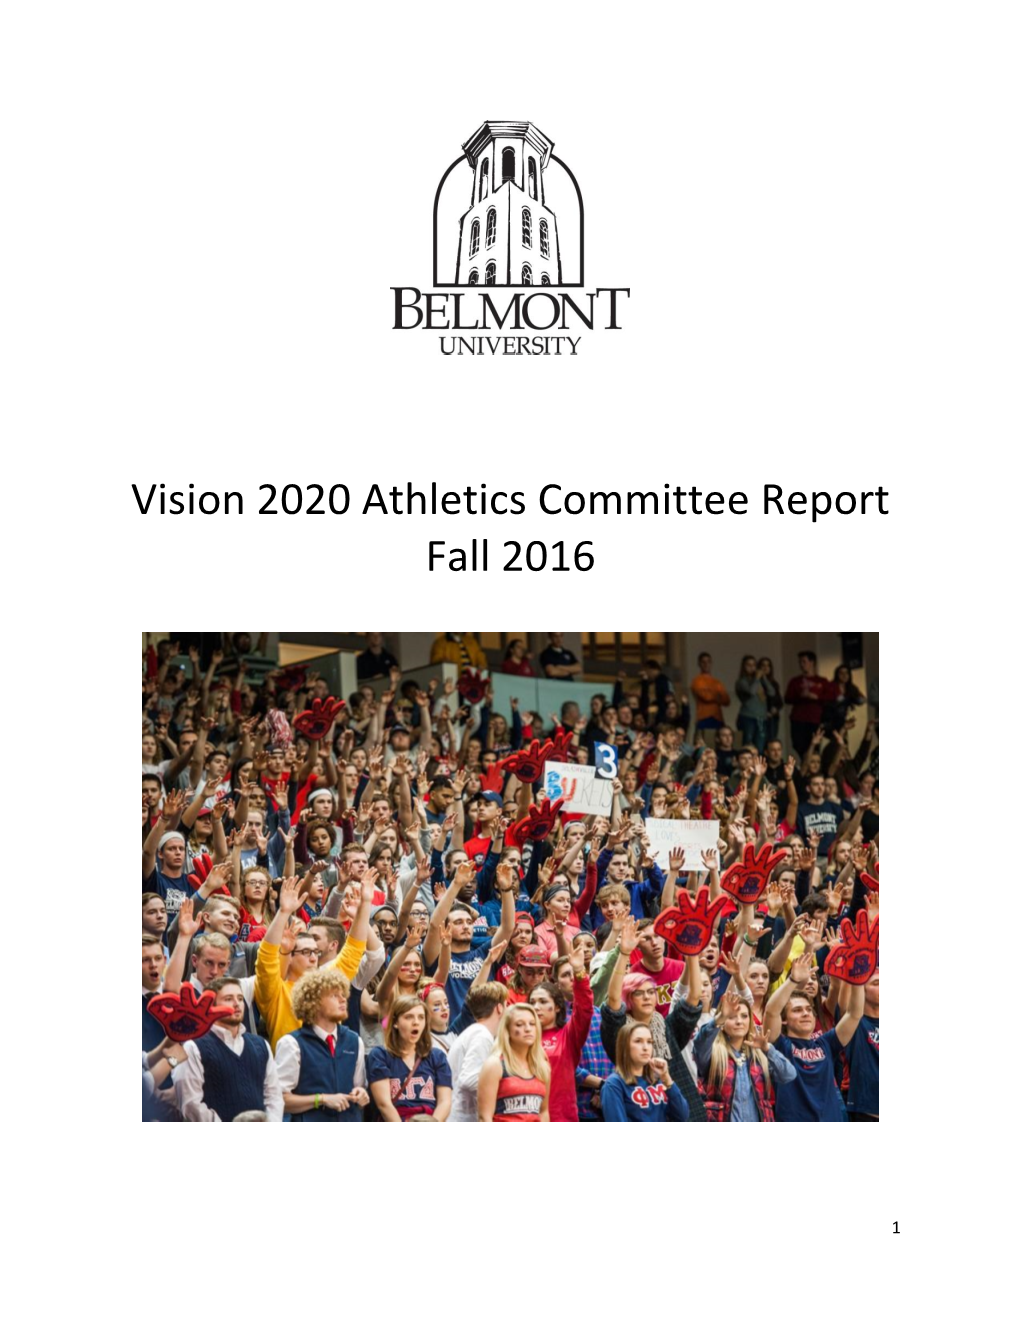 Vision 2020 Athletics Committee Report Fall 2016